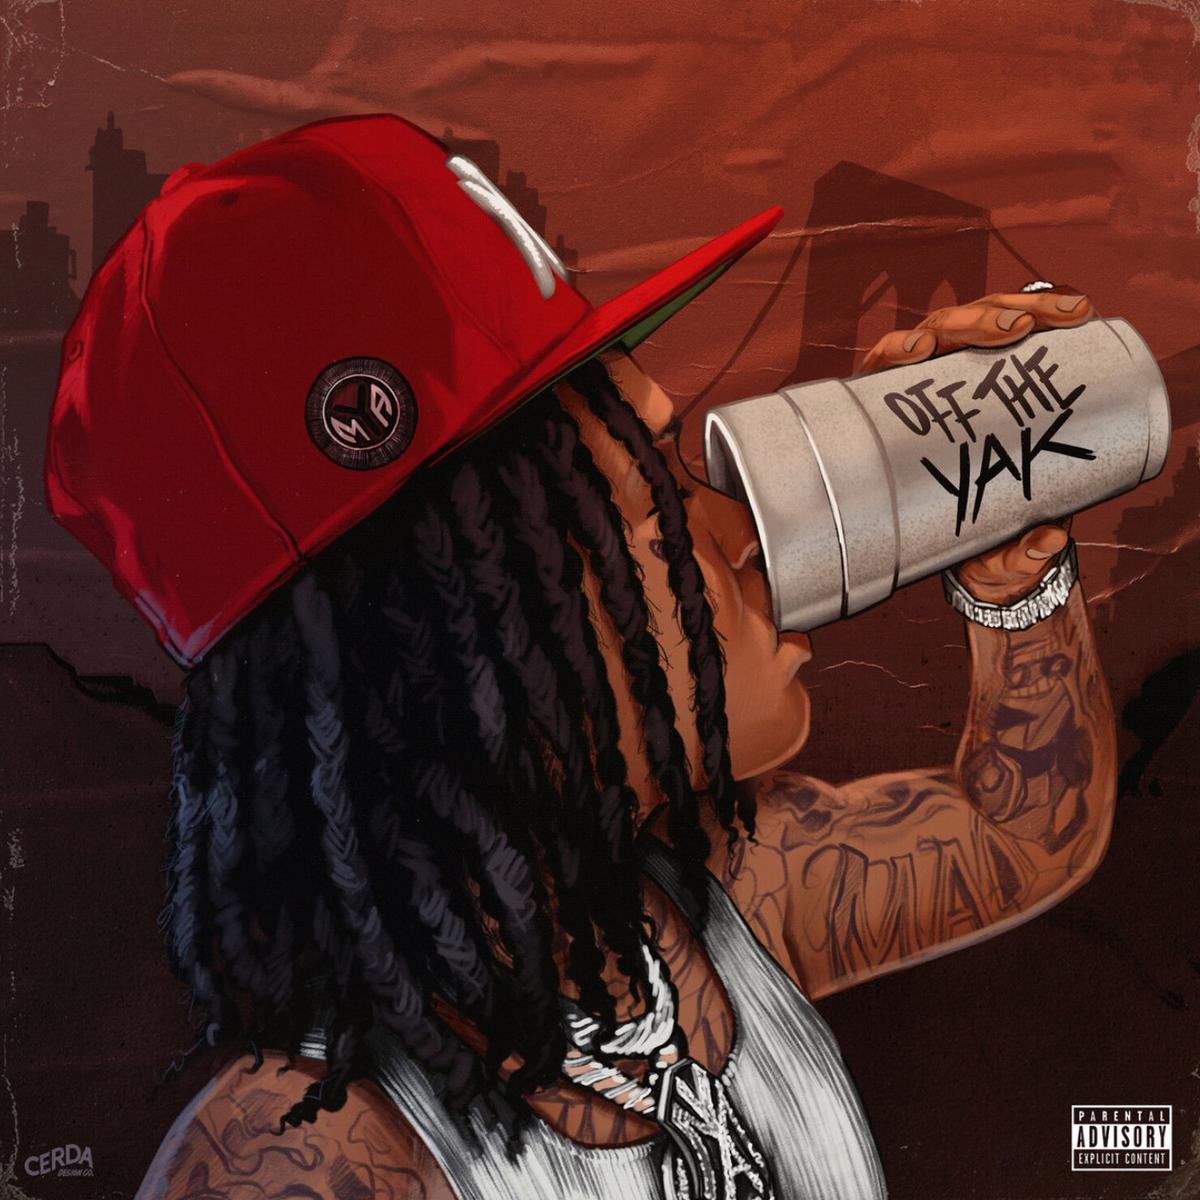 Young M.A – Off The Yak (Album Review)